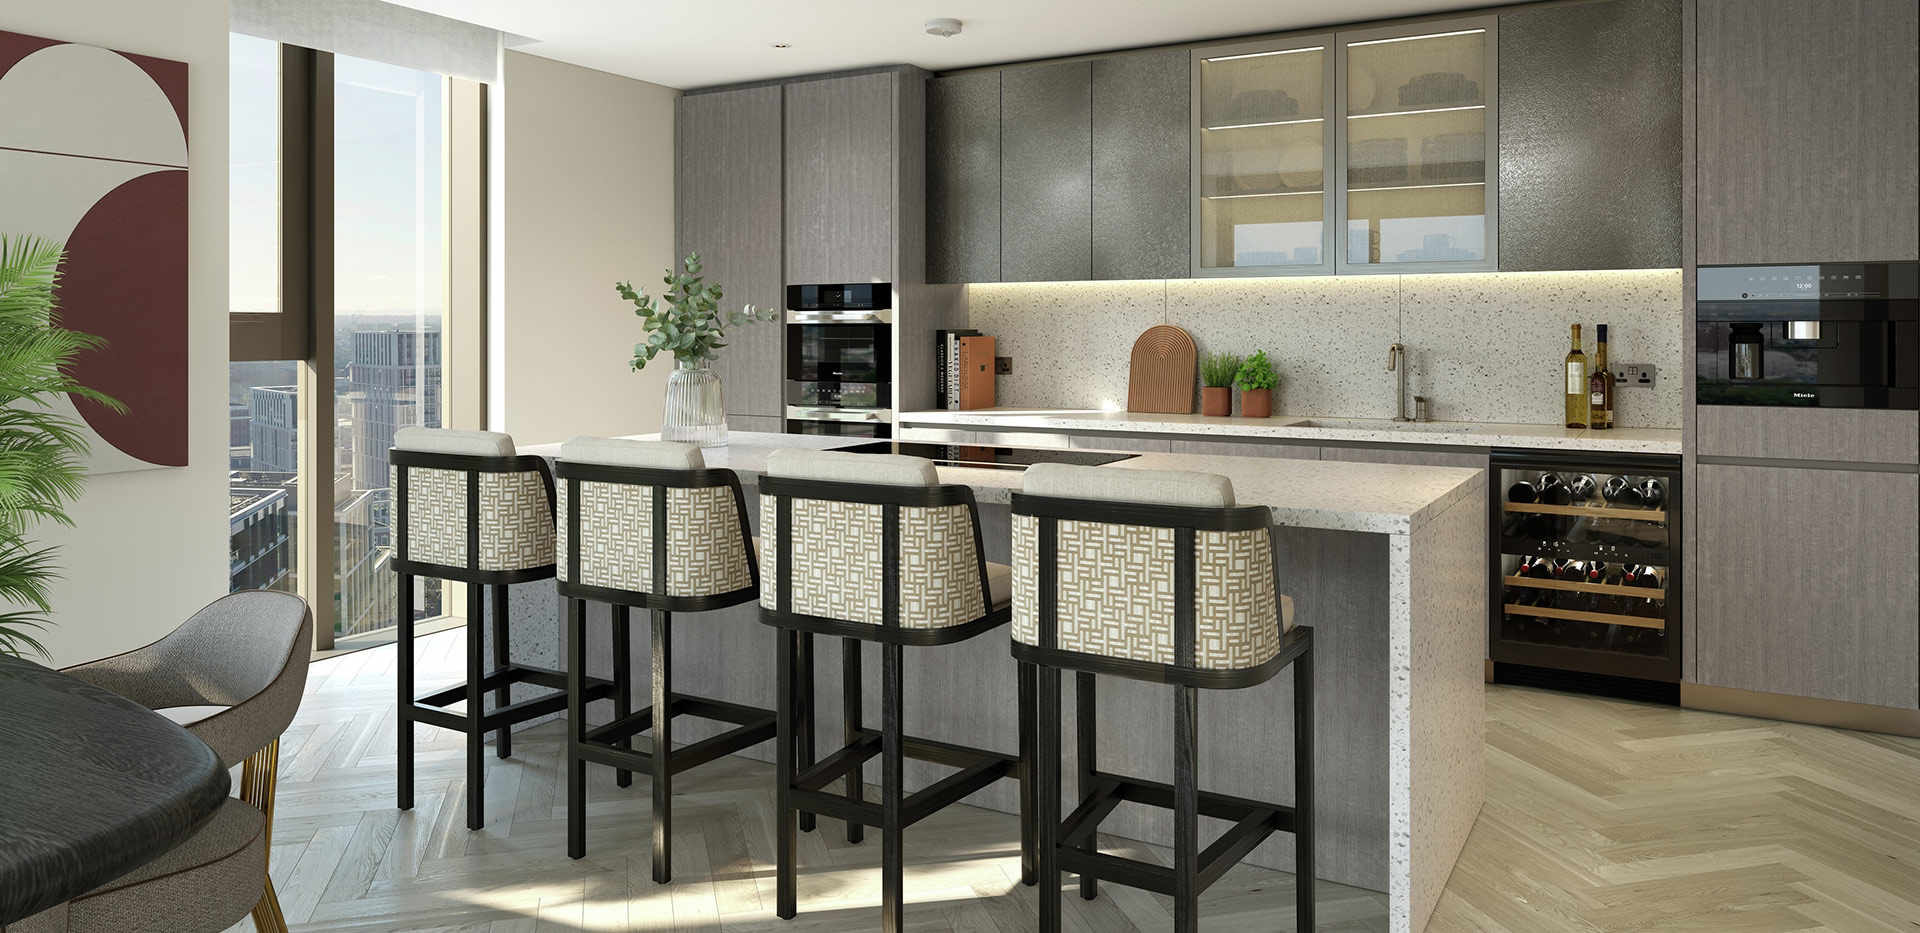 St William, Prince of Wales Drive, Upper Park Residences, Interior, Kitchen, Winter